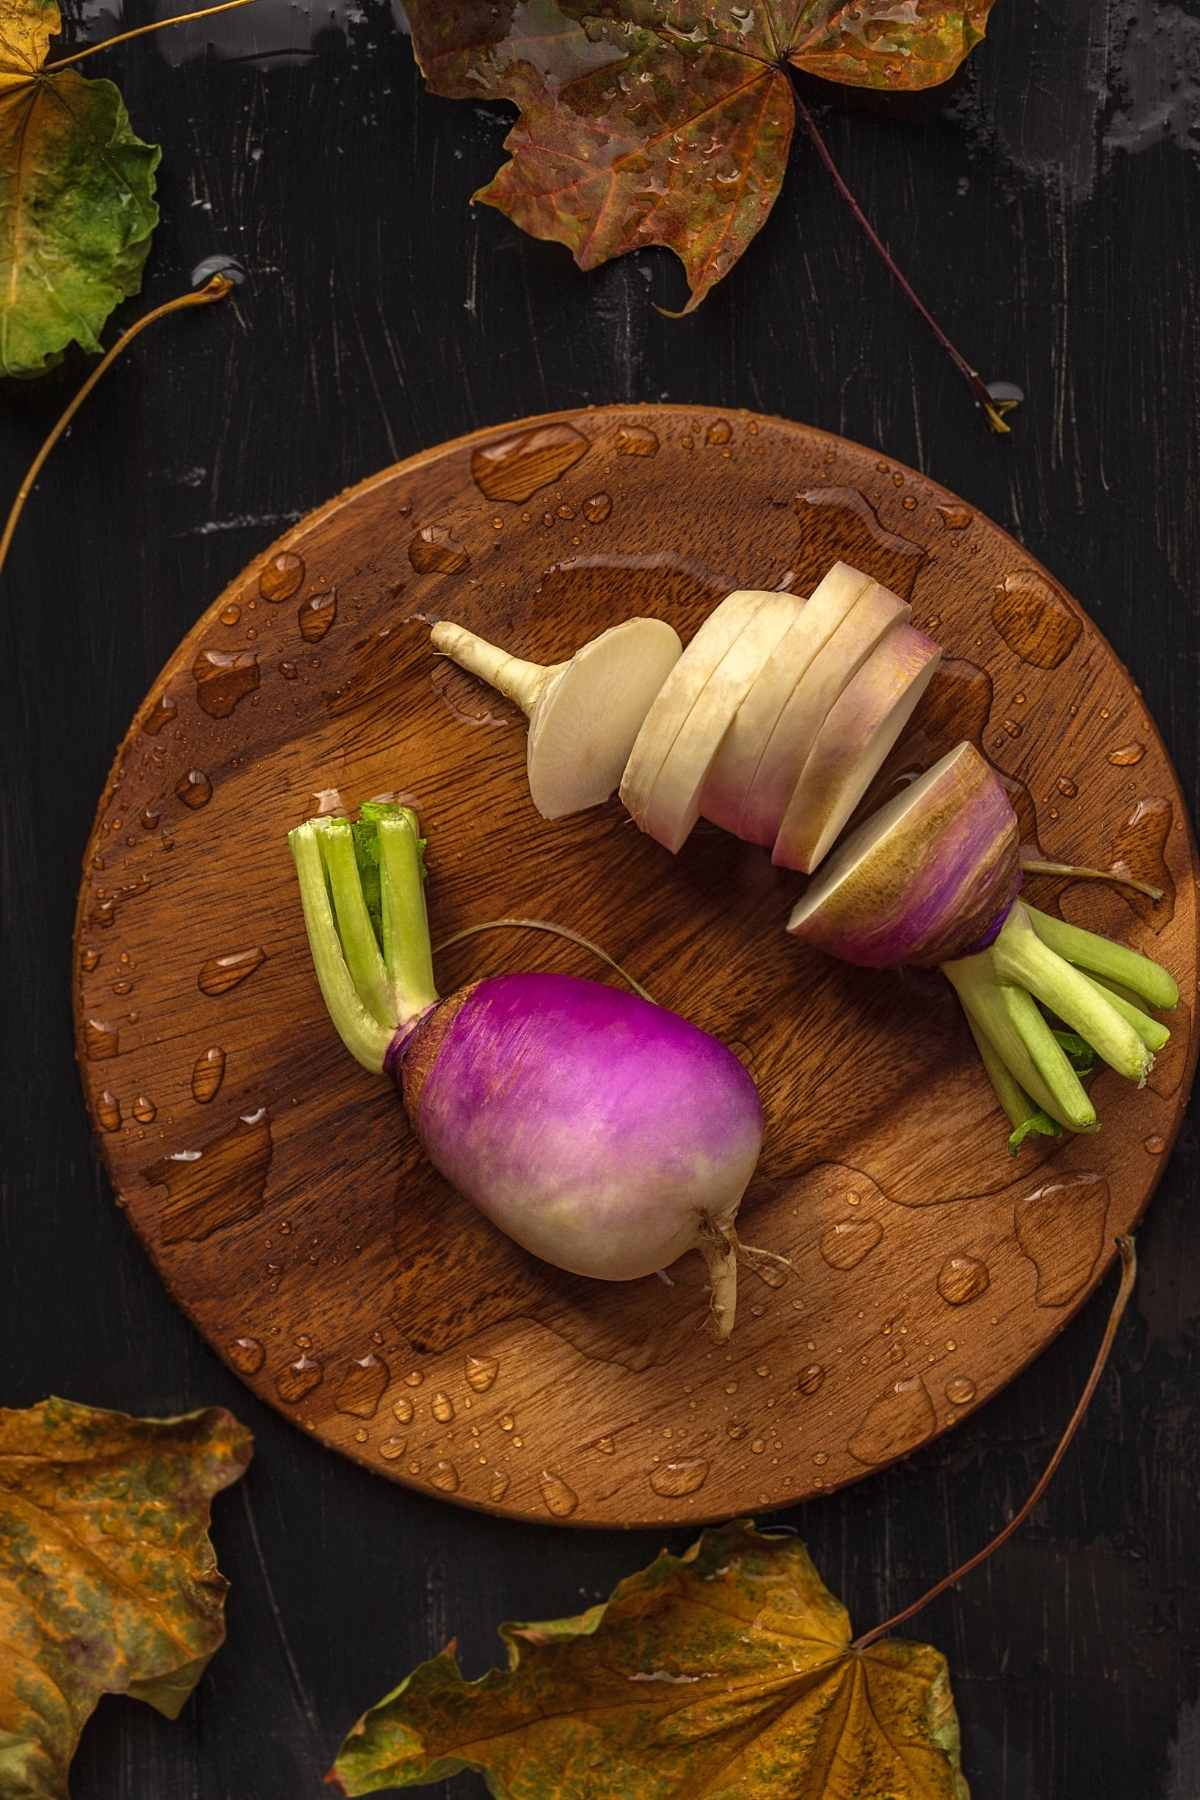 High in fiber and big on flavor, turnips are a great alternative to potatoes. They’re easy to make and can be enjoyed as a side, or in soups and stews. If you’re not familiar with turnips, give them a try! We’ve collected 10 of the best Turnip Recipes to help you get started.